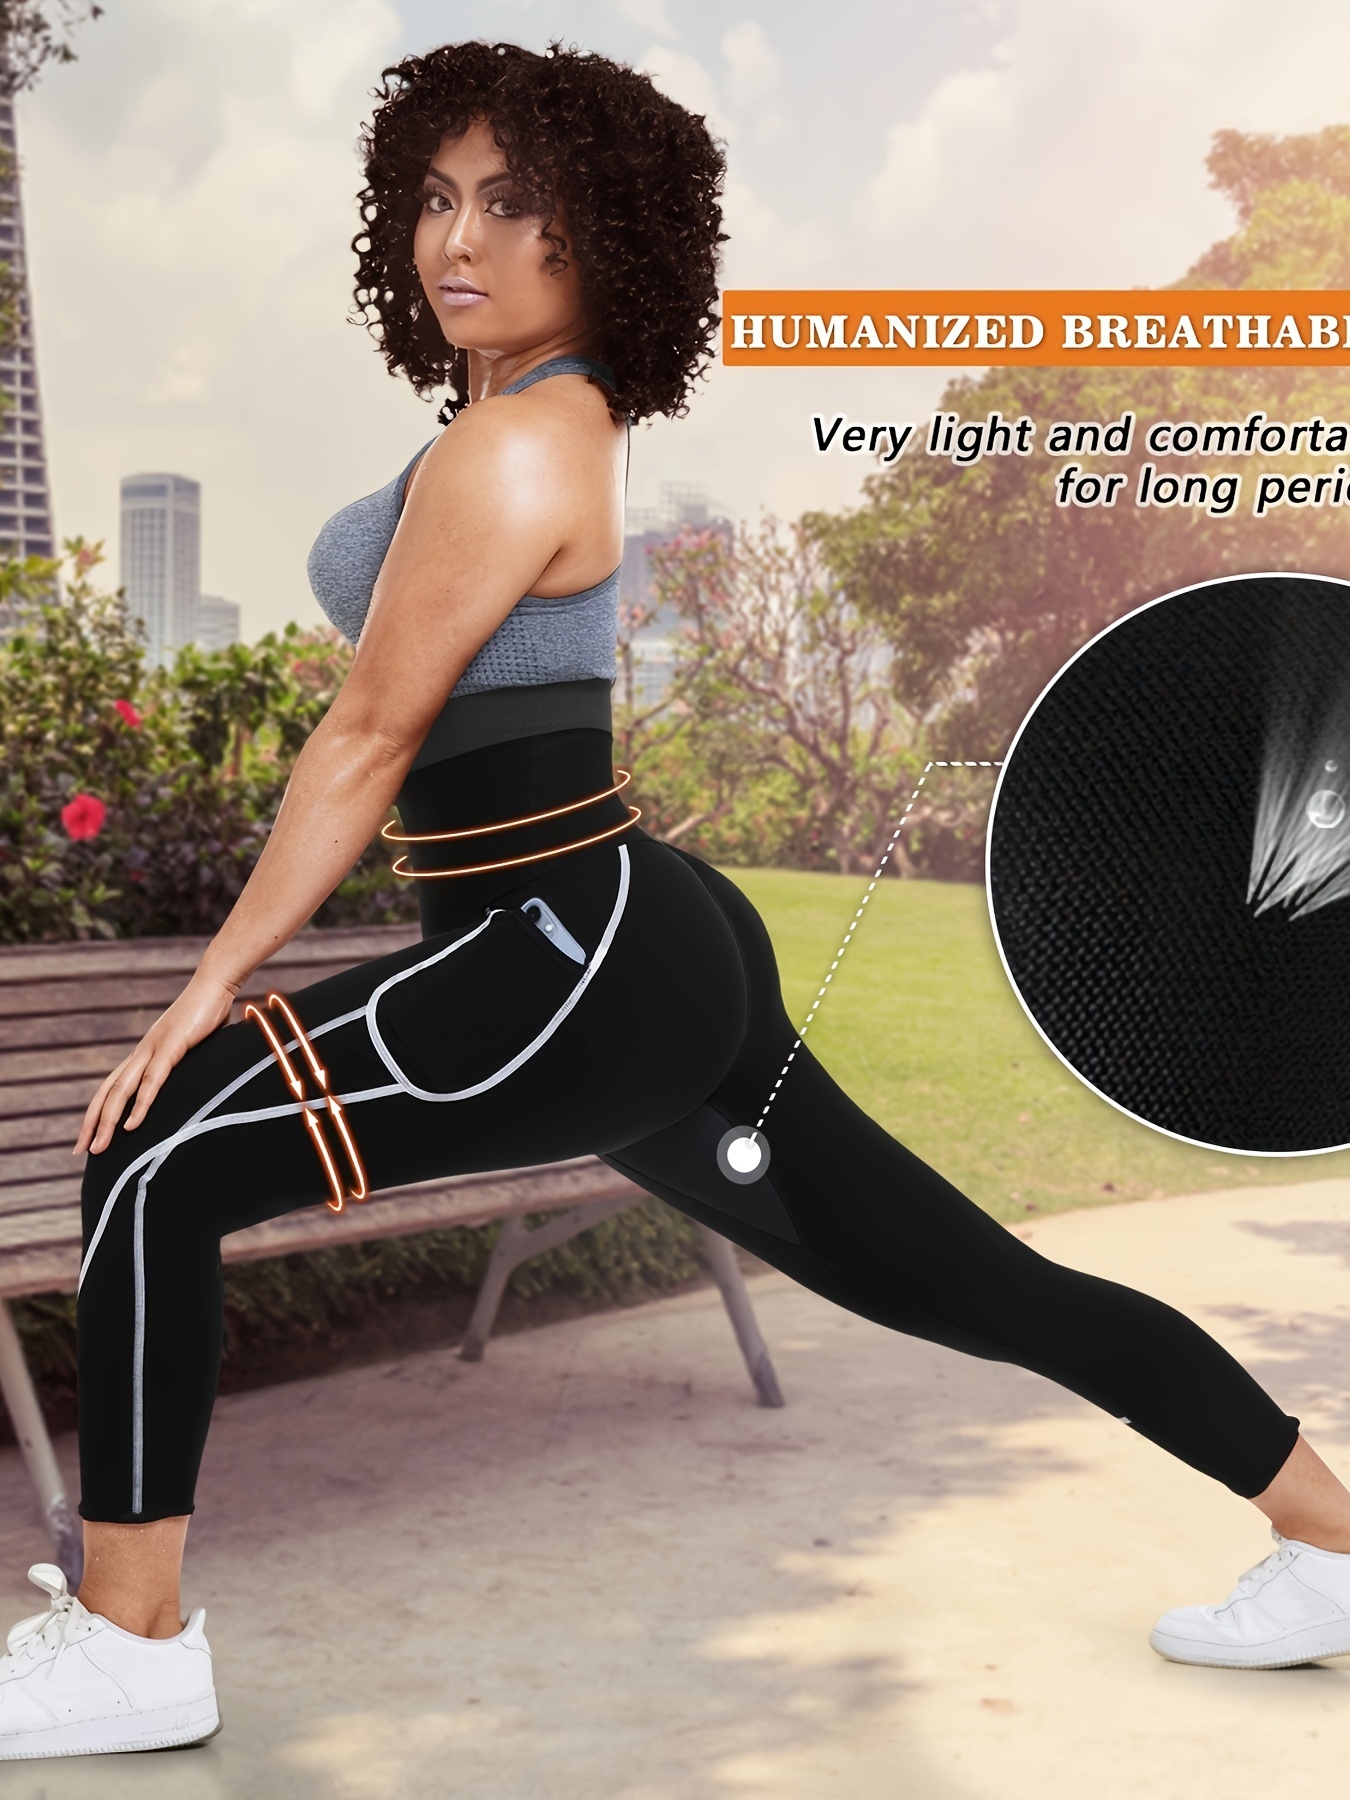 High-Waisted Sweat It Compression Workout Leggings